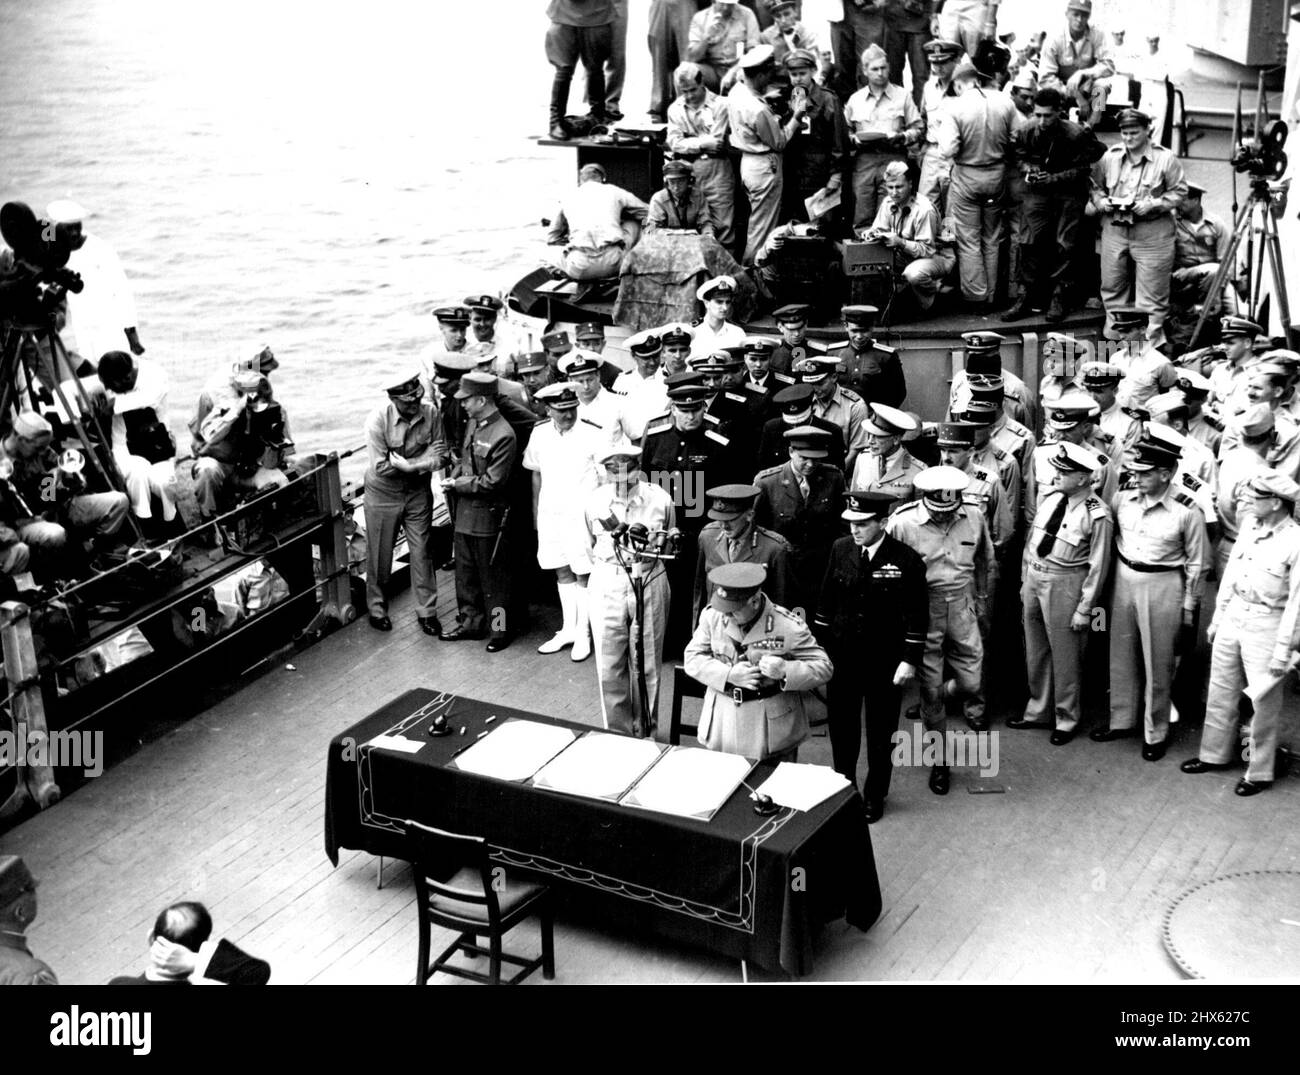 Surrender In Tokyo Bay -- General Sir Thomas Blamey with other Australian representatives behind him arrives at the table to sign the surrender document on behalf of Australia. The singing took place in Tokyo Bay on board Admiral Nimitz's Flaship USS 'Missouri' Note left foreground the Japanese General Yoshijiro Umezo and Mr. Mamoru Shigemitsu (with hand to head), the signatories for Japan. September 10, 1945. (Photo by Australian Official Photo).;Surrender In Tokyo Bay -- General Sir Thomas Bla Stock Photo